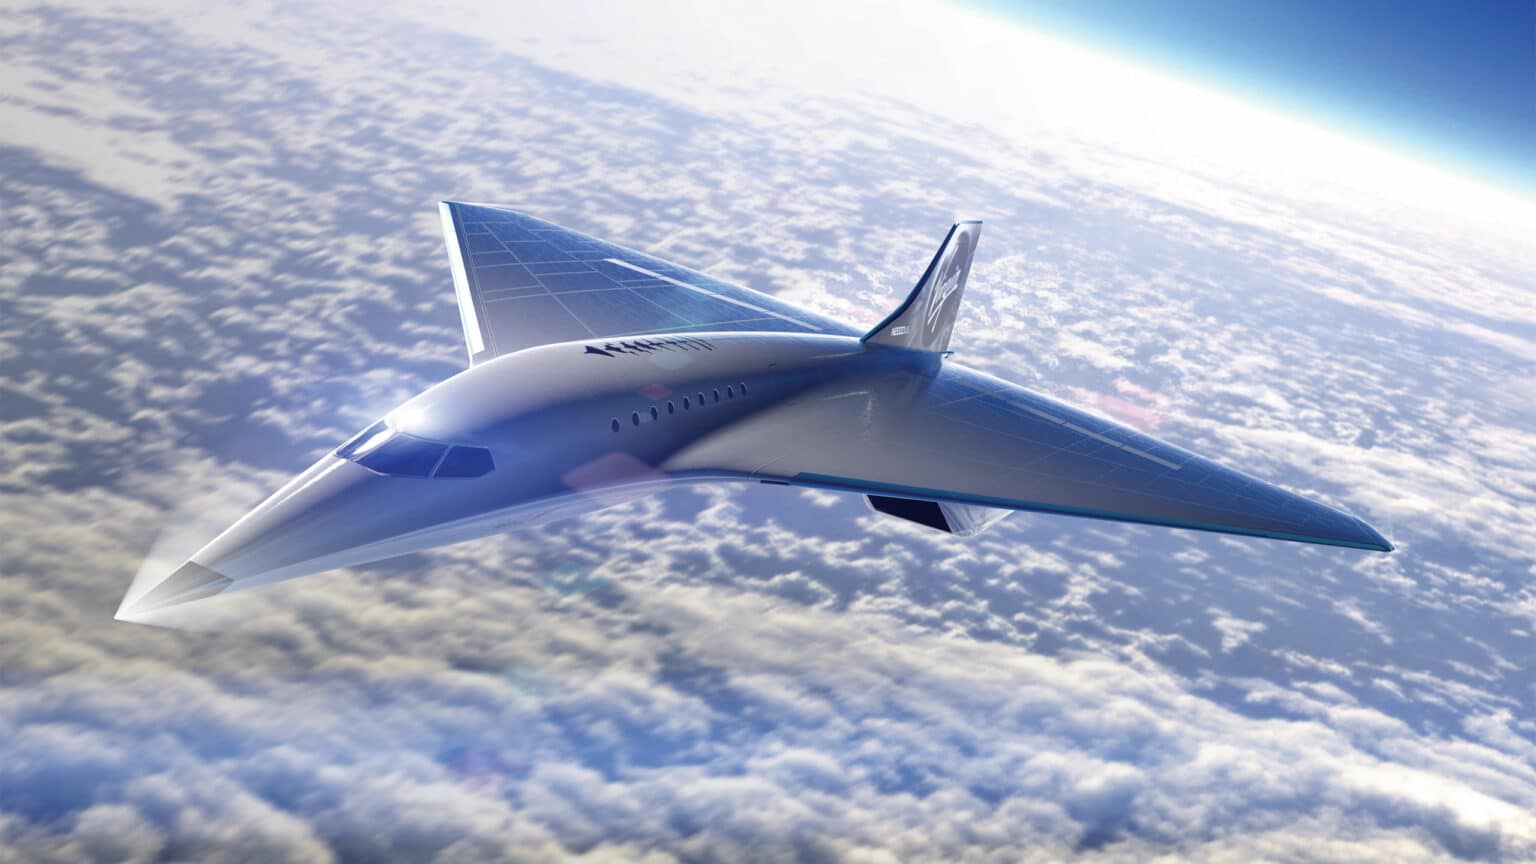 New York to London in 2 Hours? Yes, Supersonic Passenger Aircraft Are ...